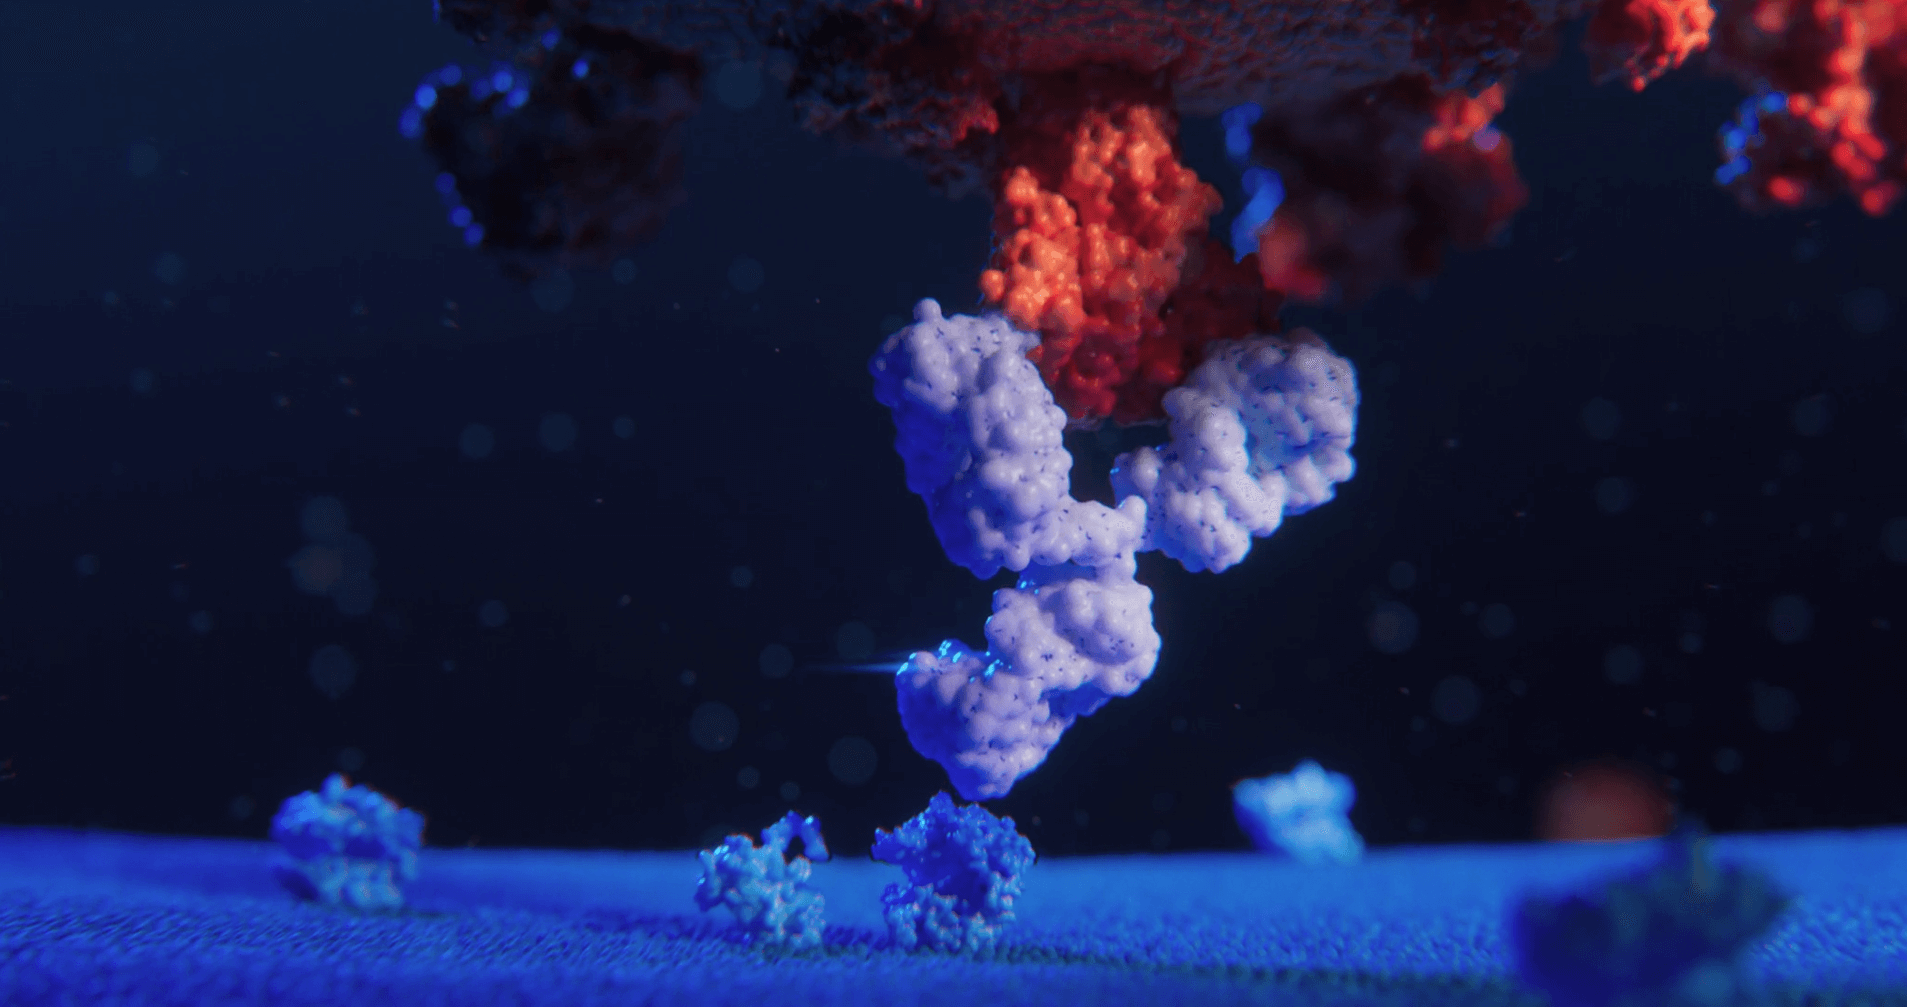 This image shows a 3D animation of an antibody avoiding the attachment of the spike protein to a receptor on a human cell